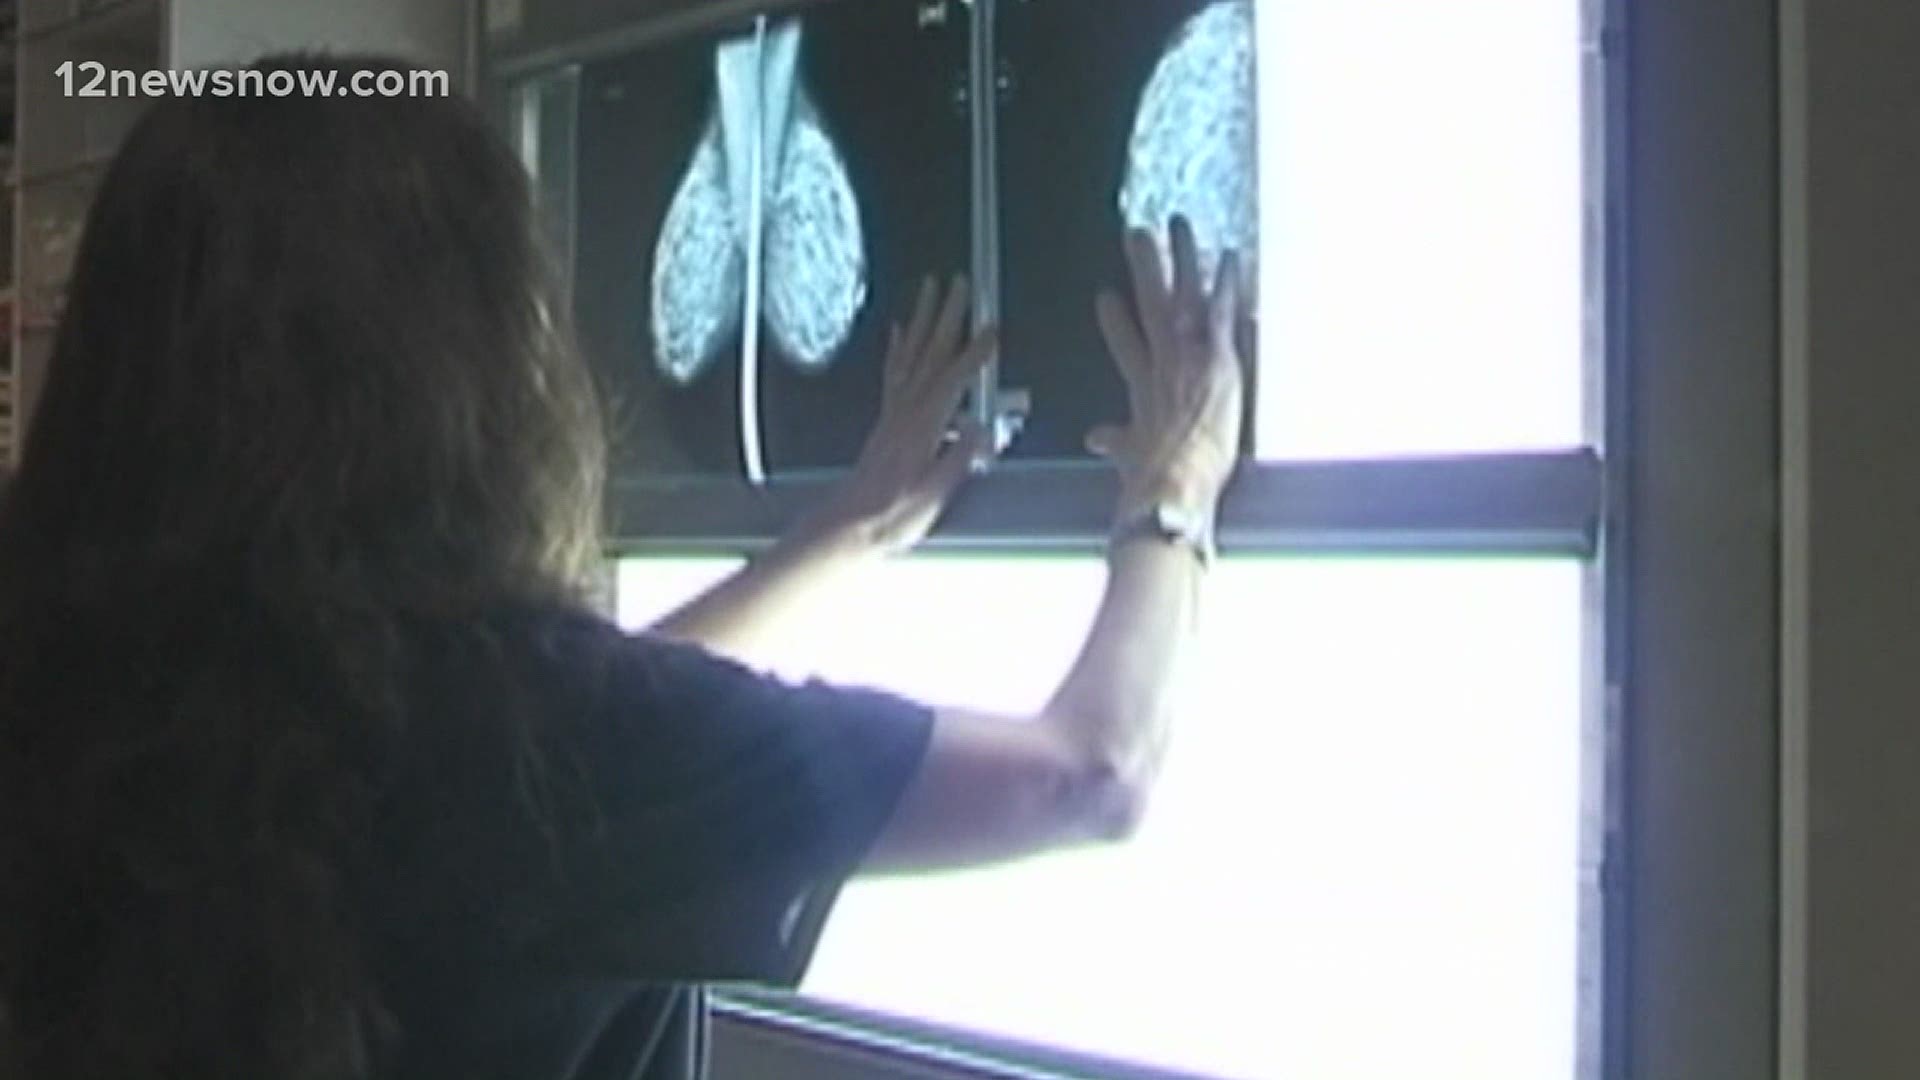 Early detection is critical, breast cancer survivors and doctors said.